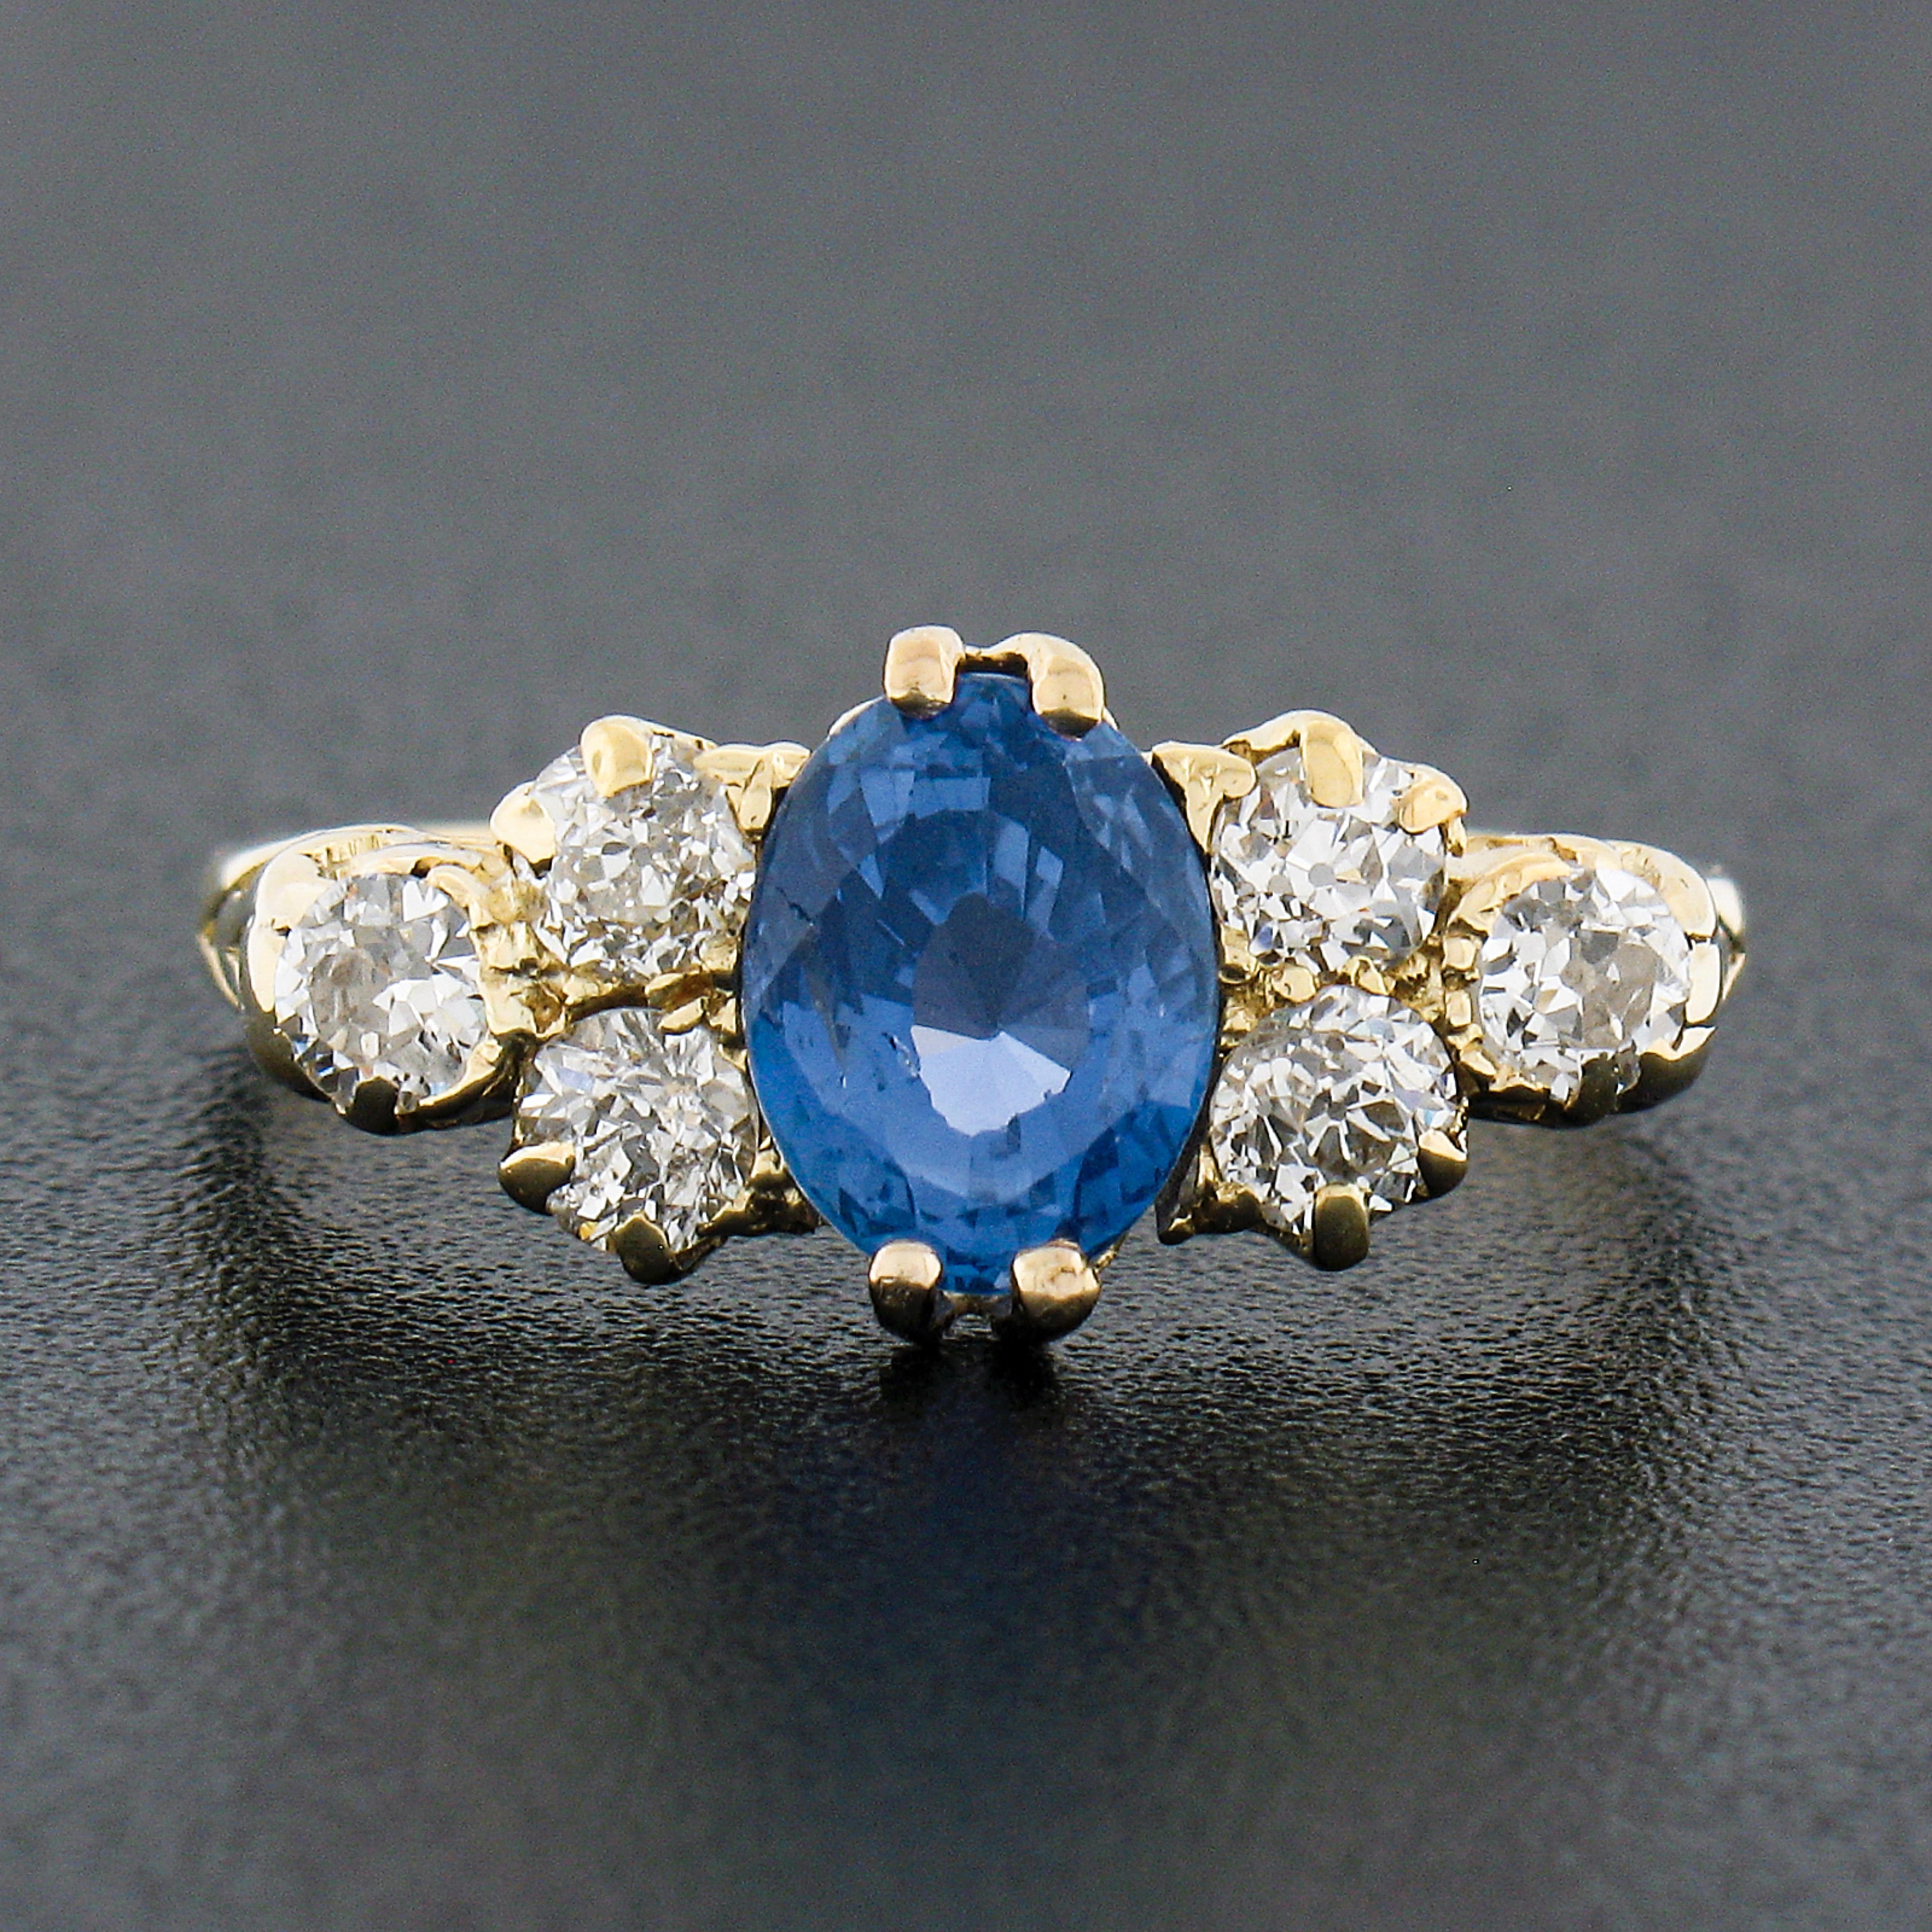 Here we have an absolutely gorgeous antique band ring crafted in solid 18k yellow gold during the Victorian period. The ring features an approximately 1.75 carat, oval cut, natural Burma sapphire at its center and flanked on either side by a fiery